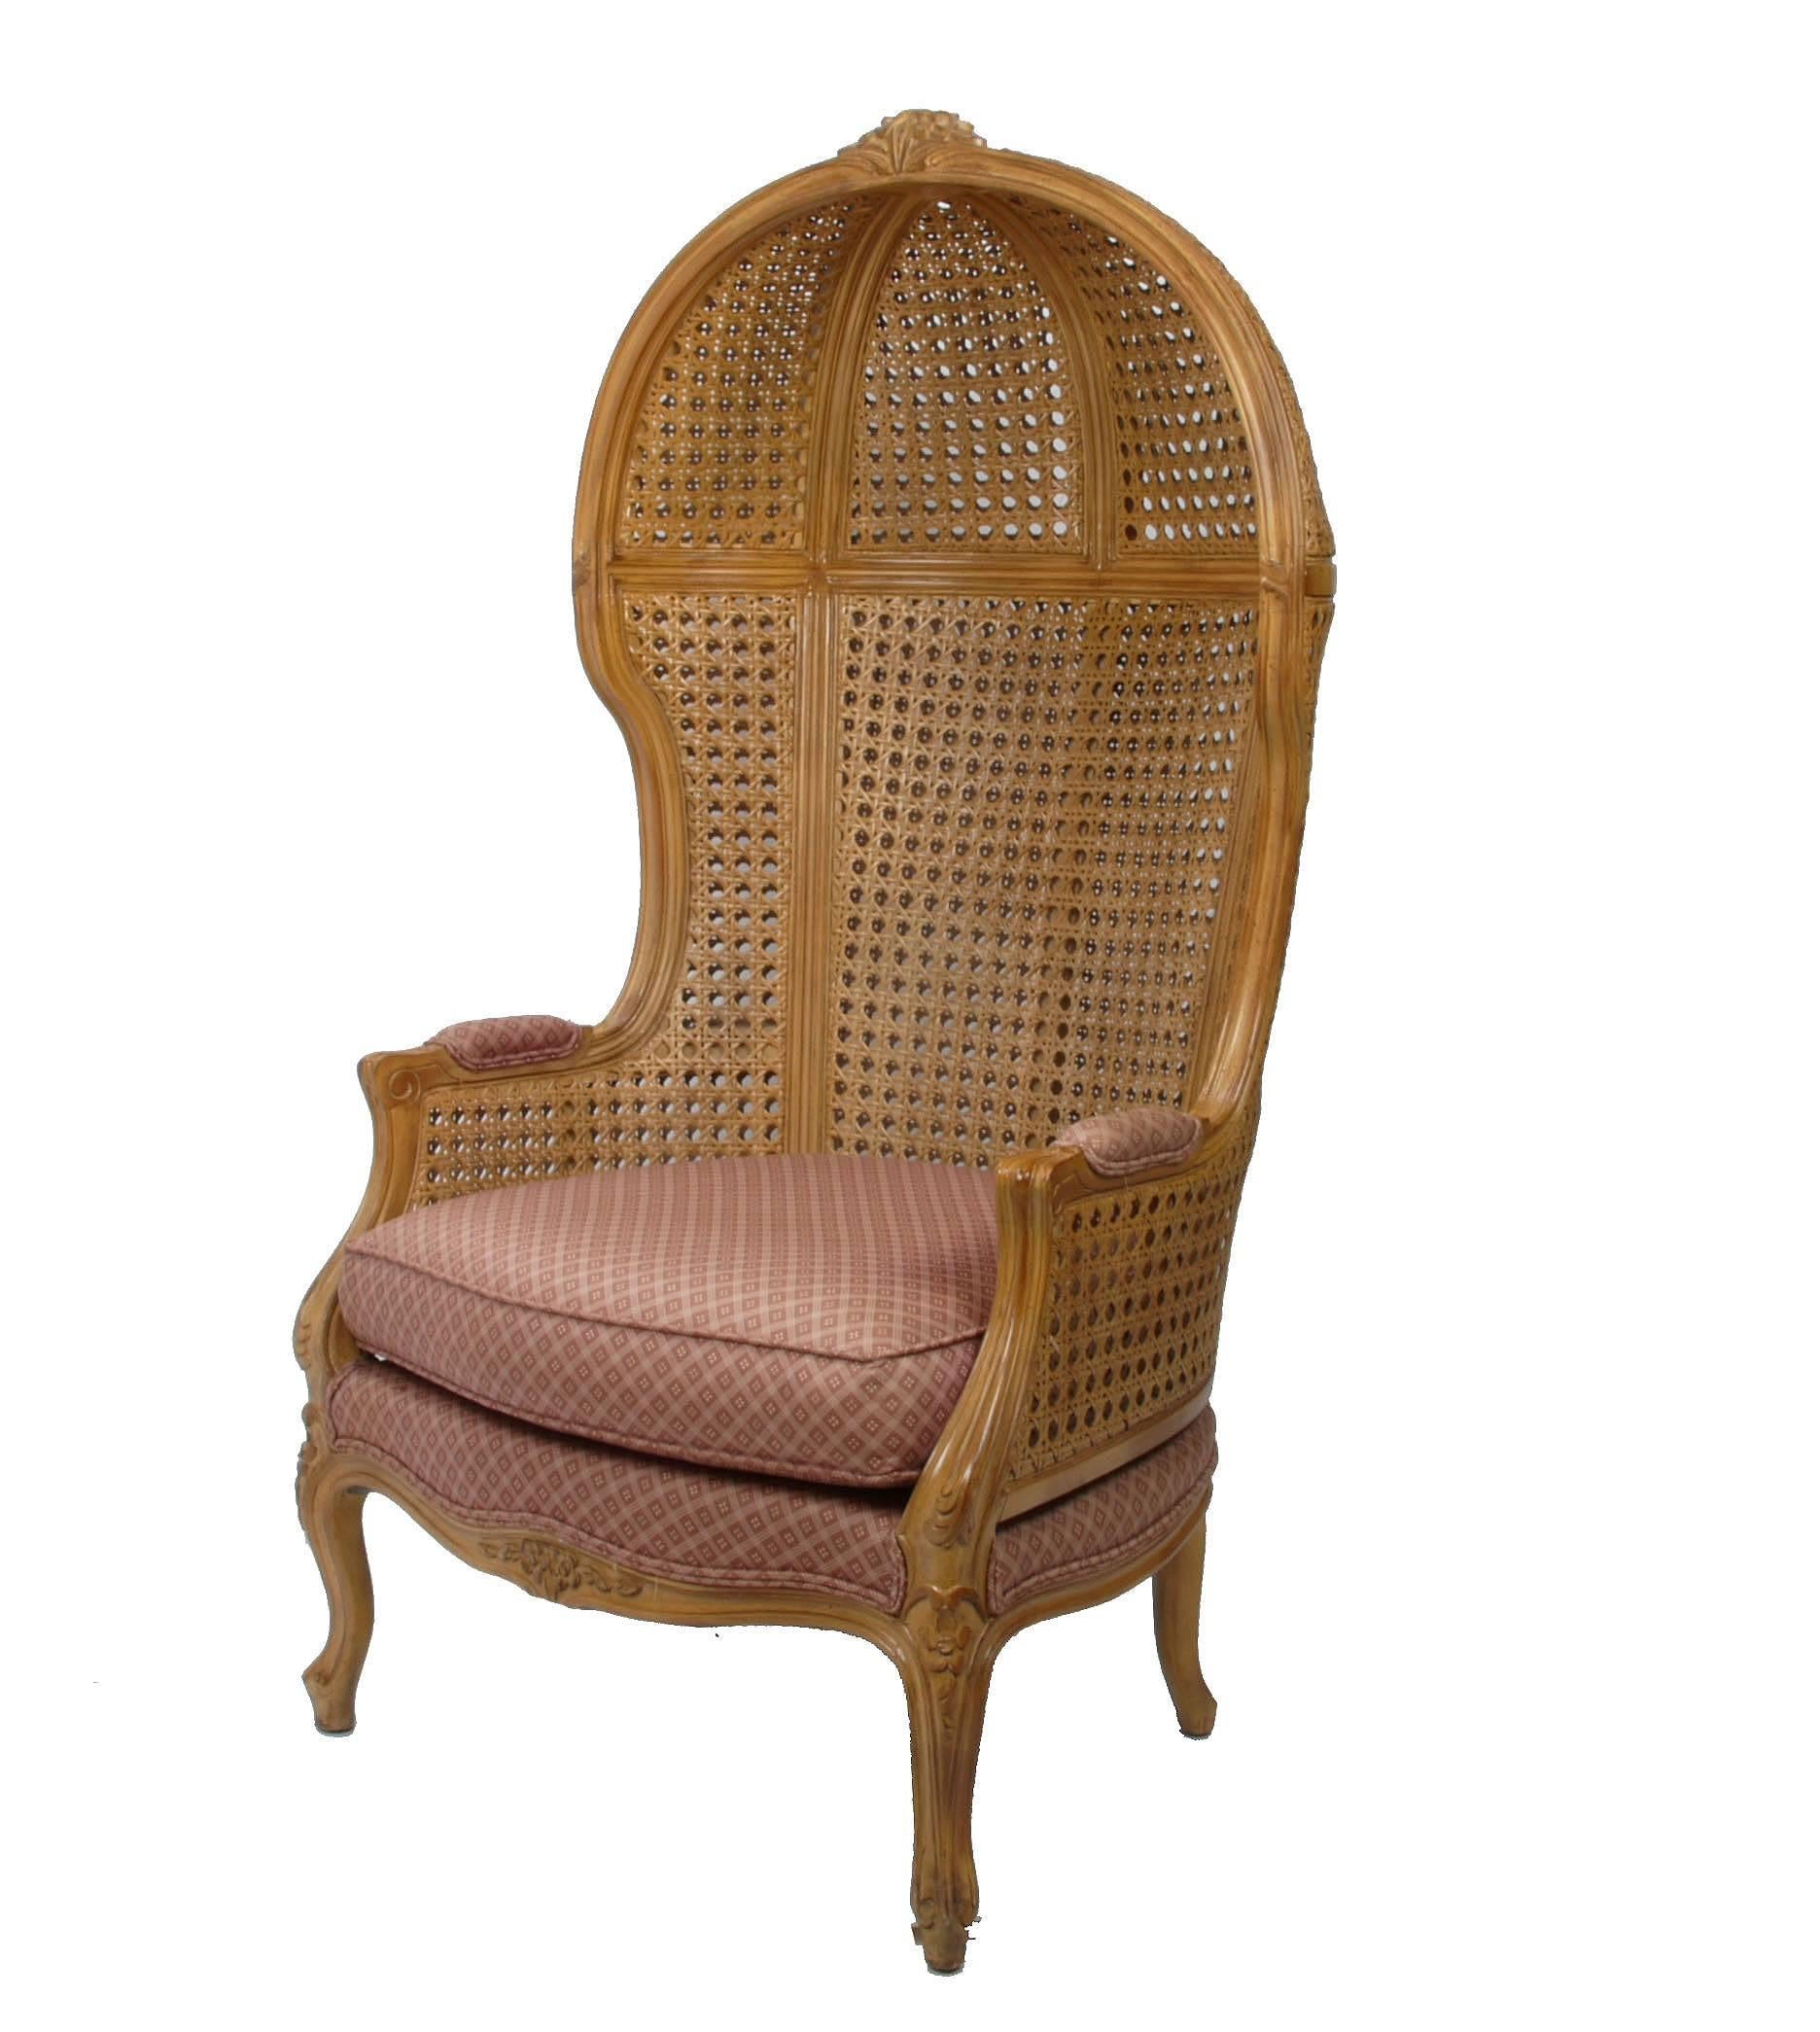 Hand-carved rattan and cane high-back hooded chair.
Marked Avanti Furniture Company under seat cushion.
Seat Height: 18.5 inches,  Arm Height: 24 inches.